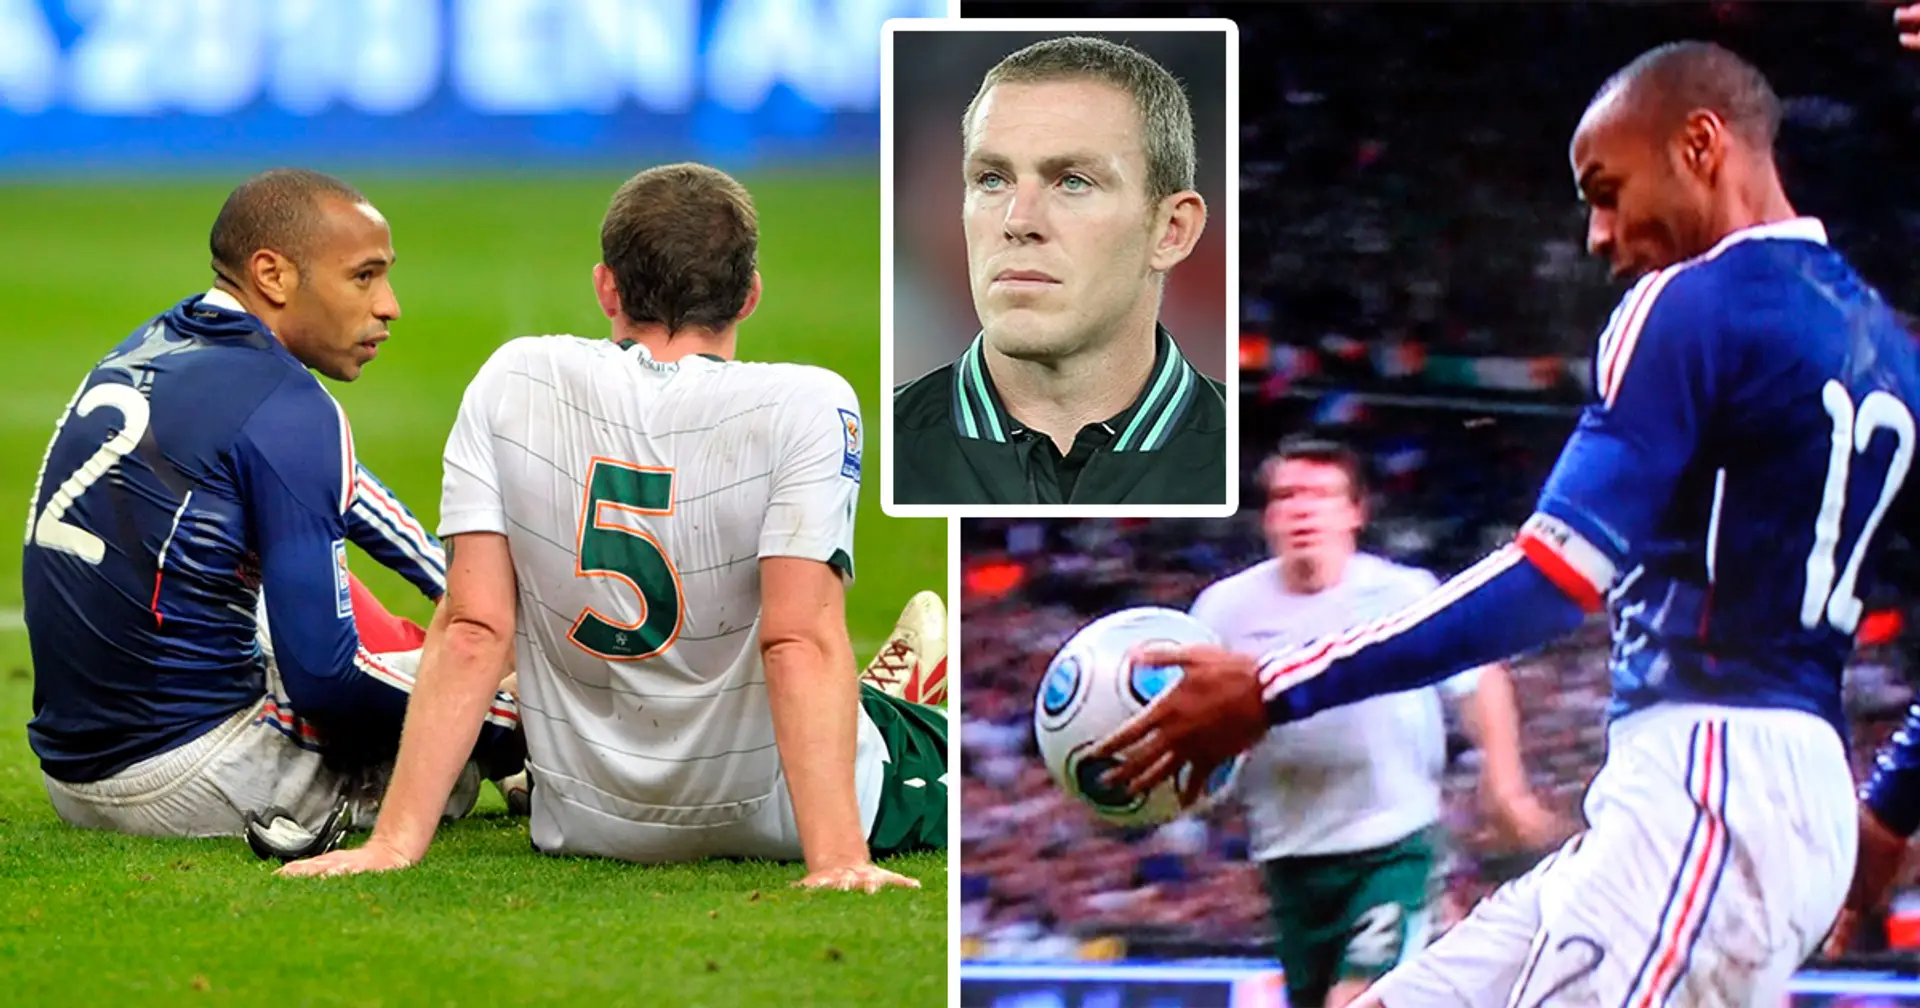 'He came and sat down beside me on the pitch': Richard Dunne reveals what exactly Thierry Henry told him after infamous handball episode